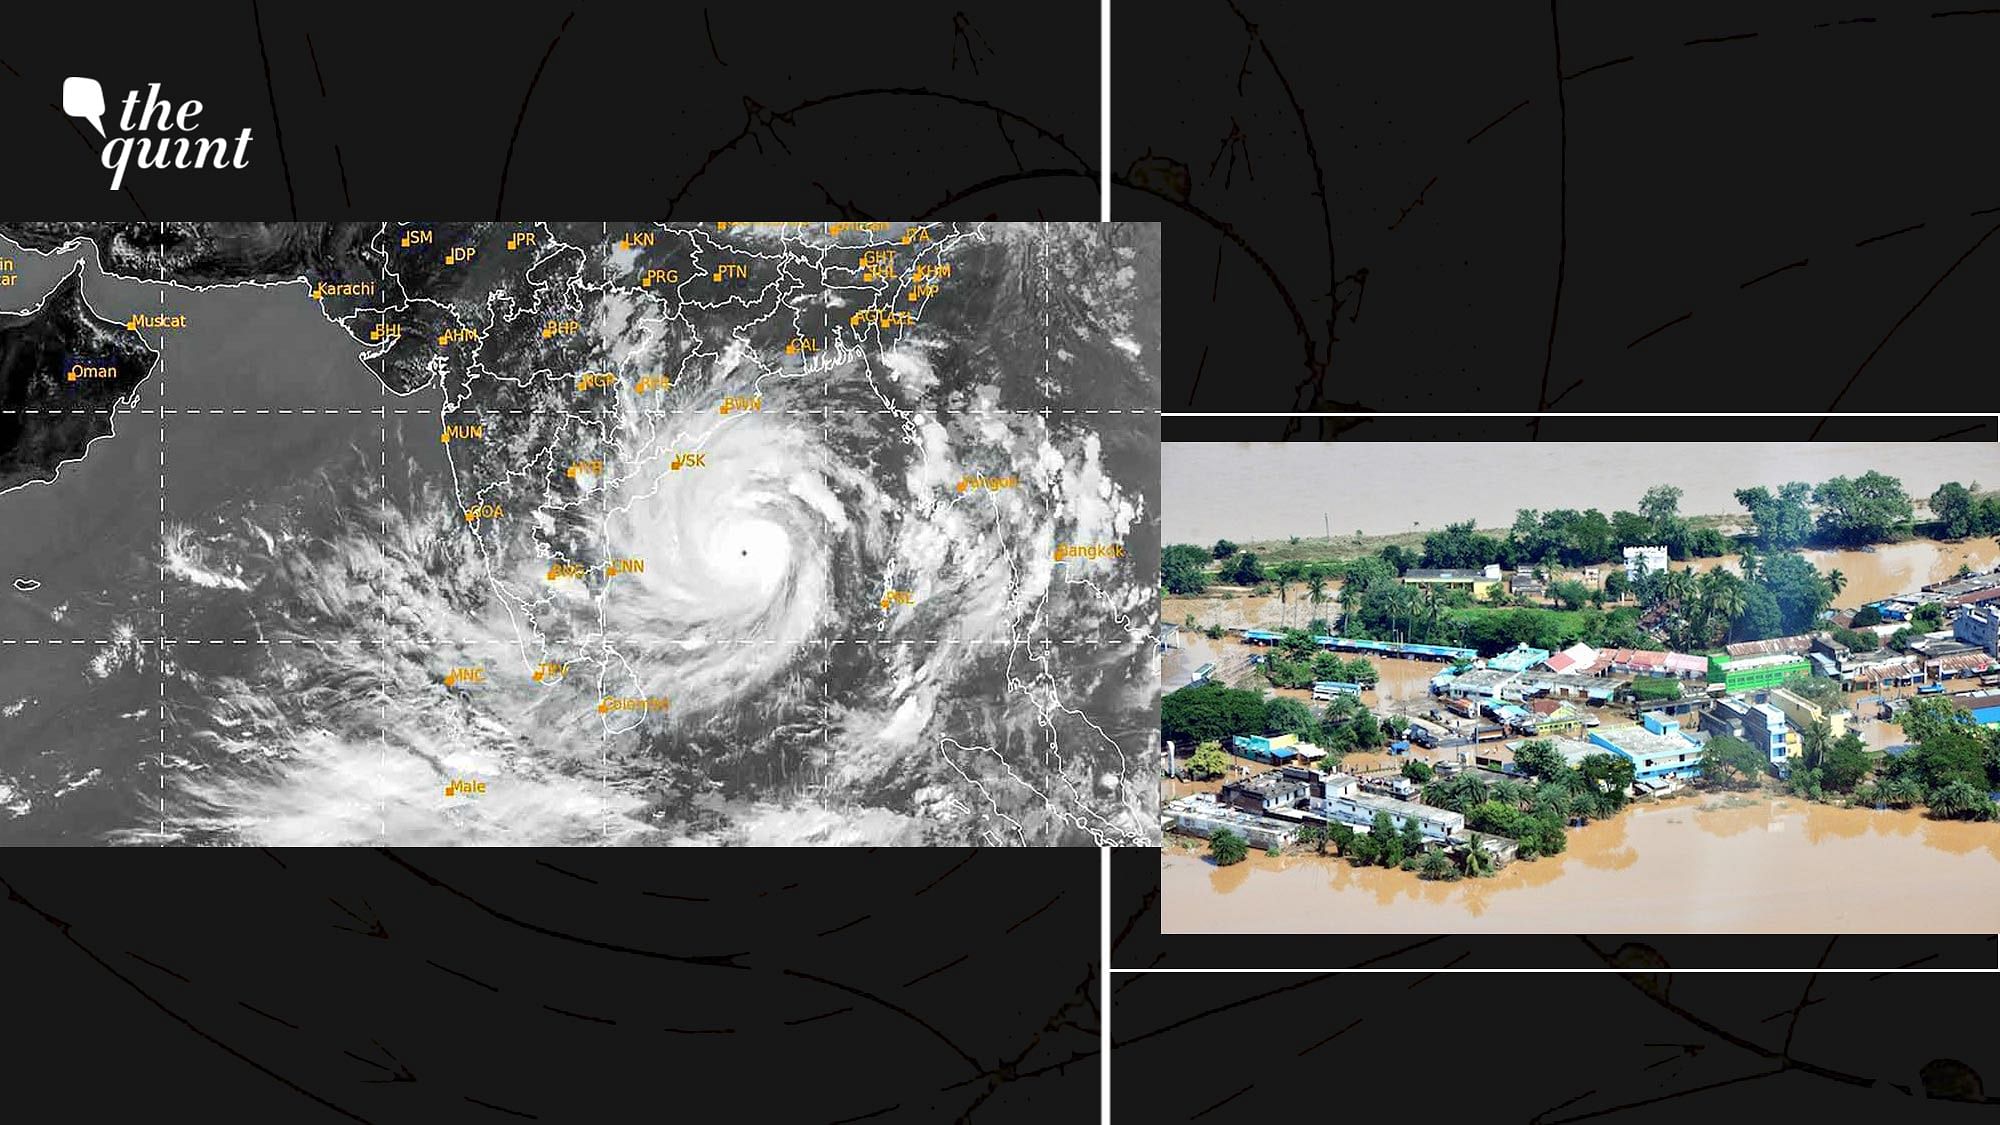 Odisha’s super cyclone is etched vividly in the minds of everyone who has experienced it.